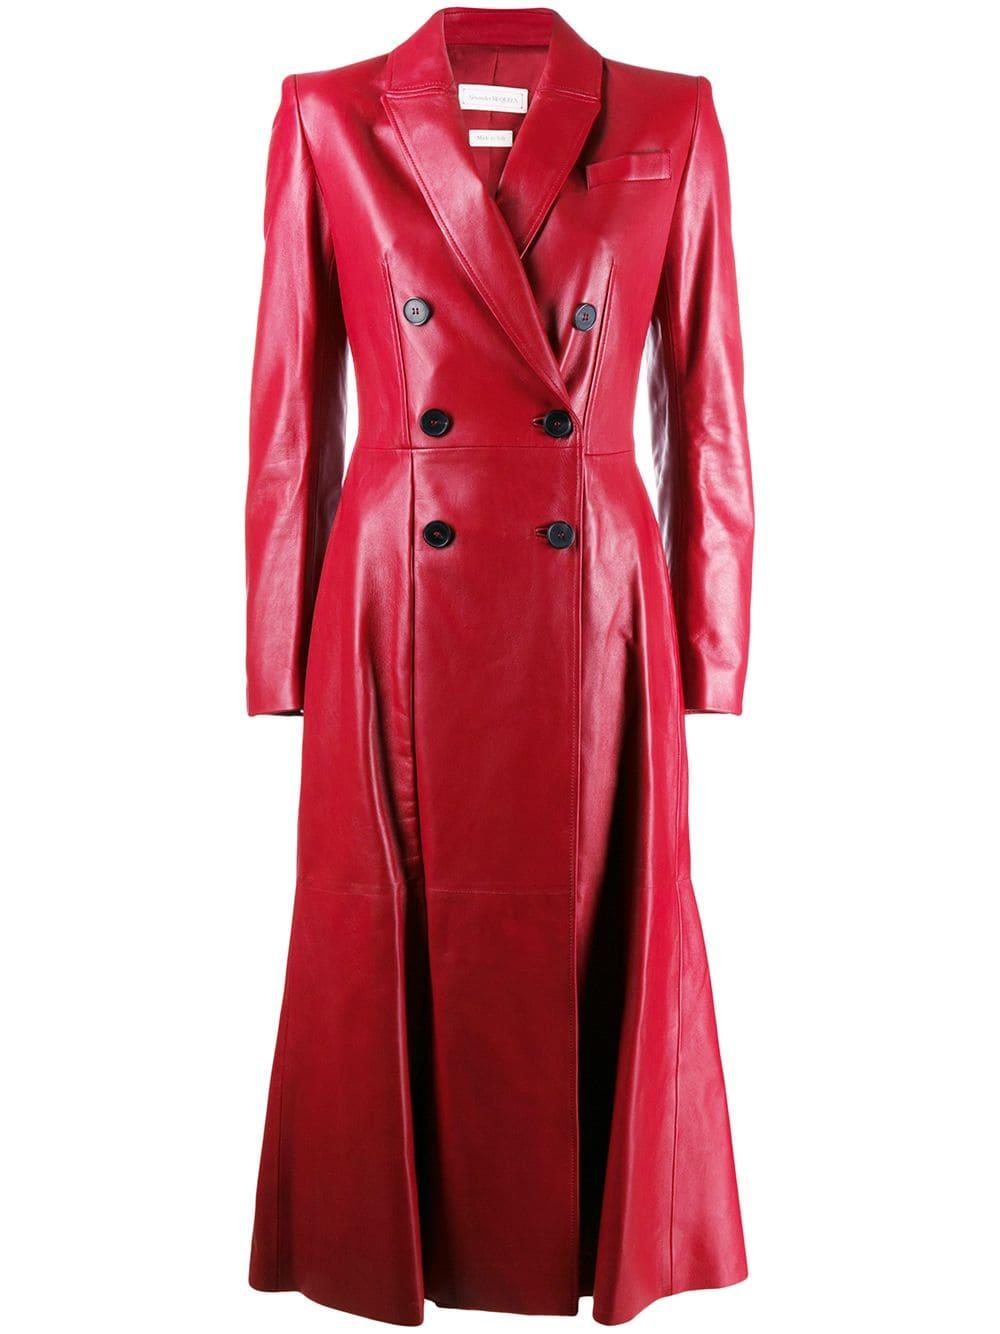 Alexander McQueen Leather Double-breasted Trench Coat in Red - Lyst